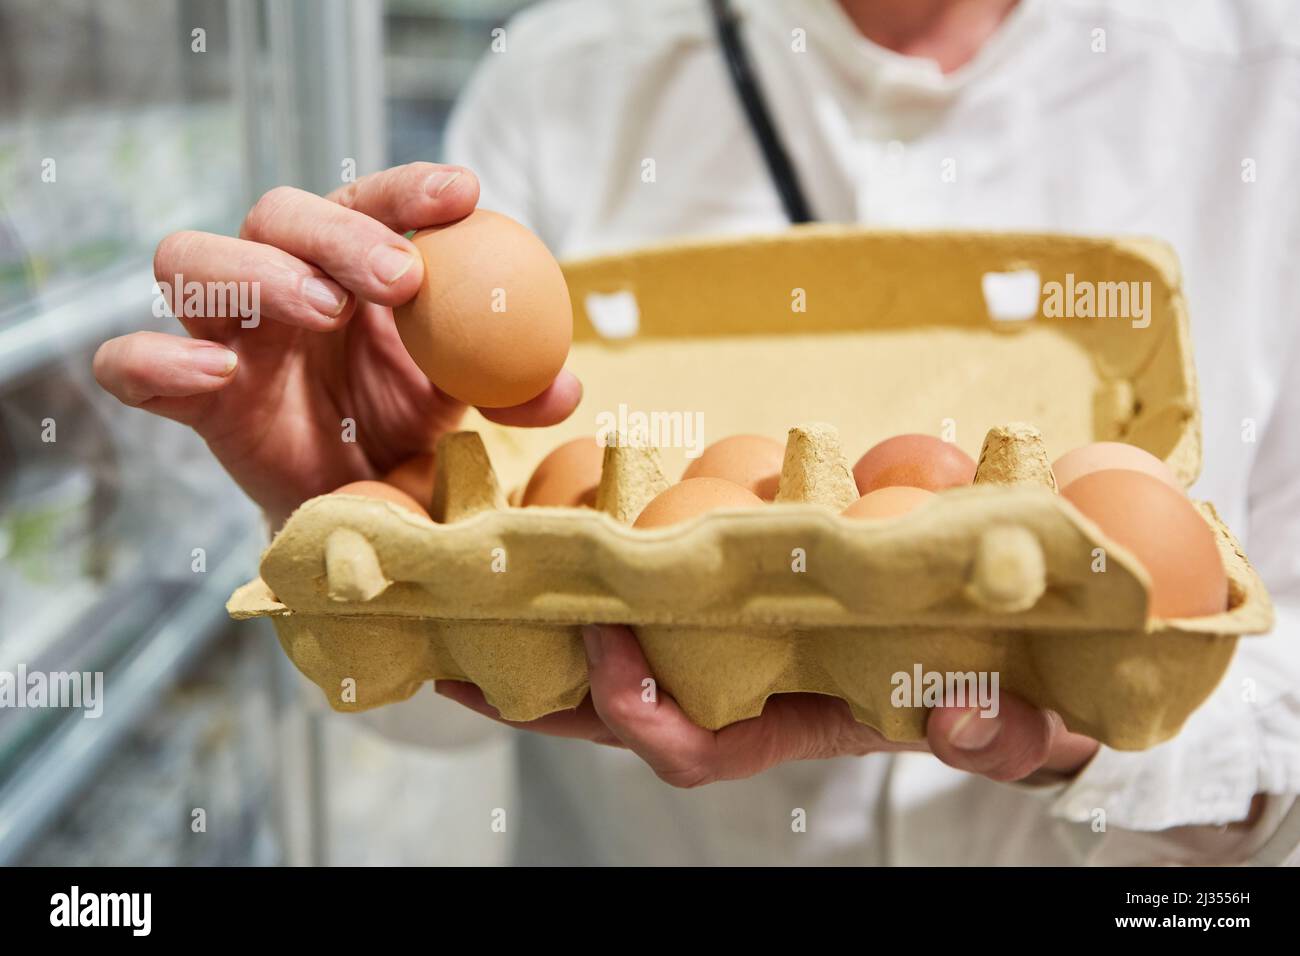 Hand holding a cardboard box with organic local eggs while shopping in the supermarket Stock Photo